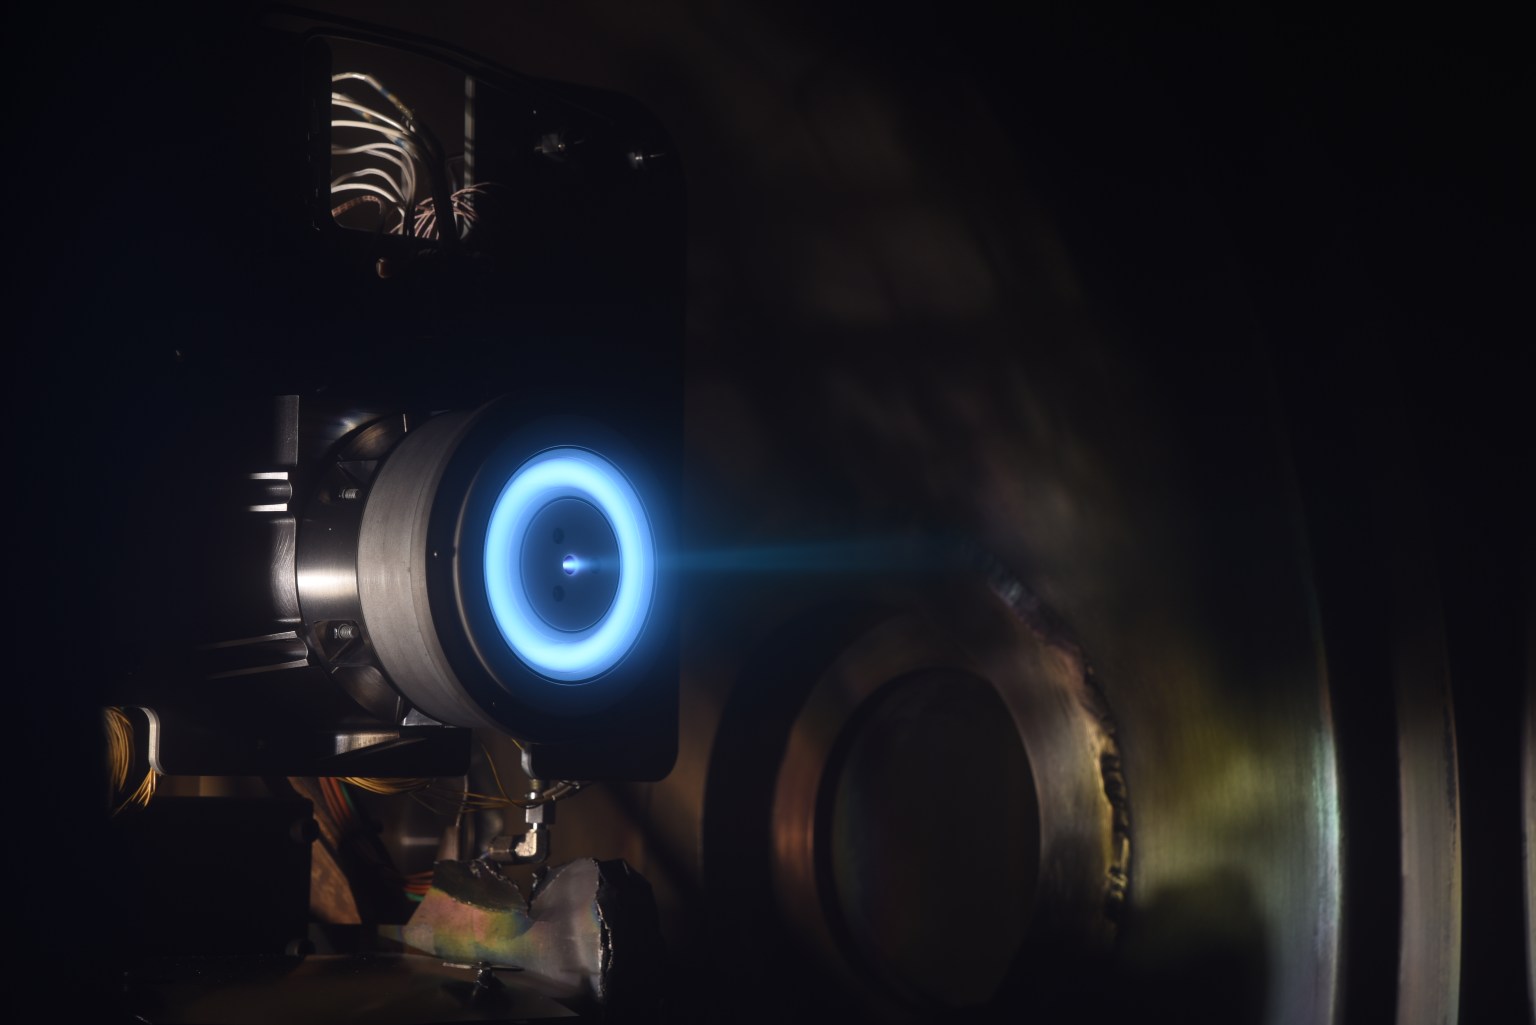 Pushing the Limits of Sub-Kilowatt Electric Propulsion Technology to Enable Planetary Exploration and Commercial Mission Concepts